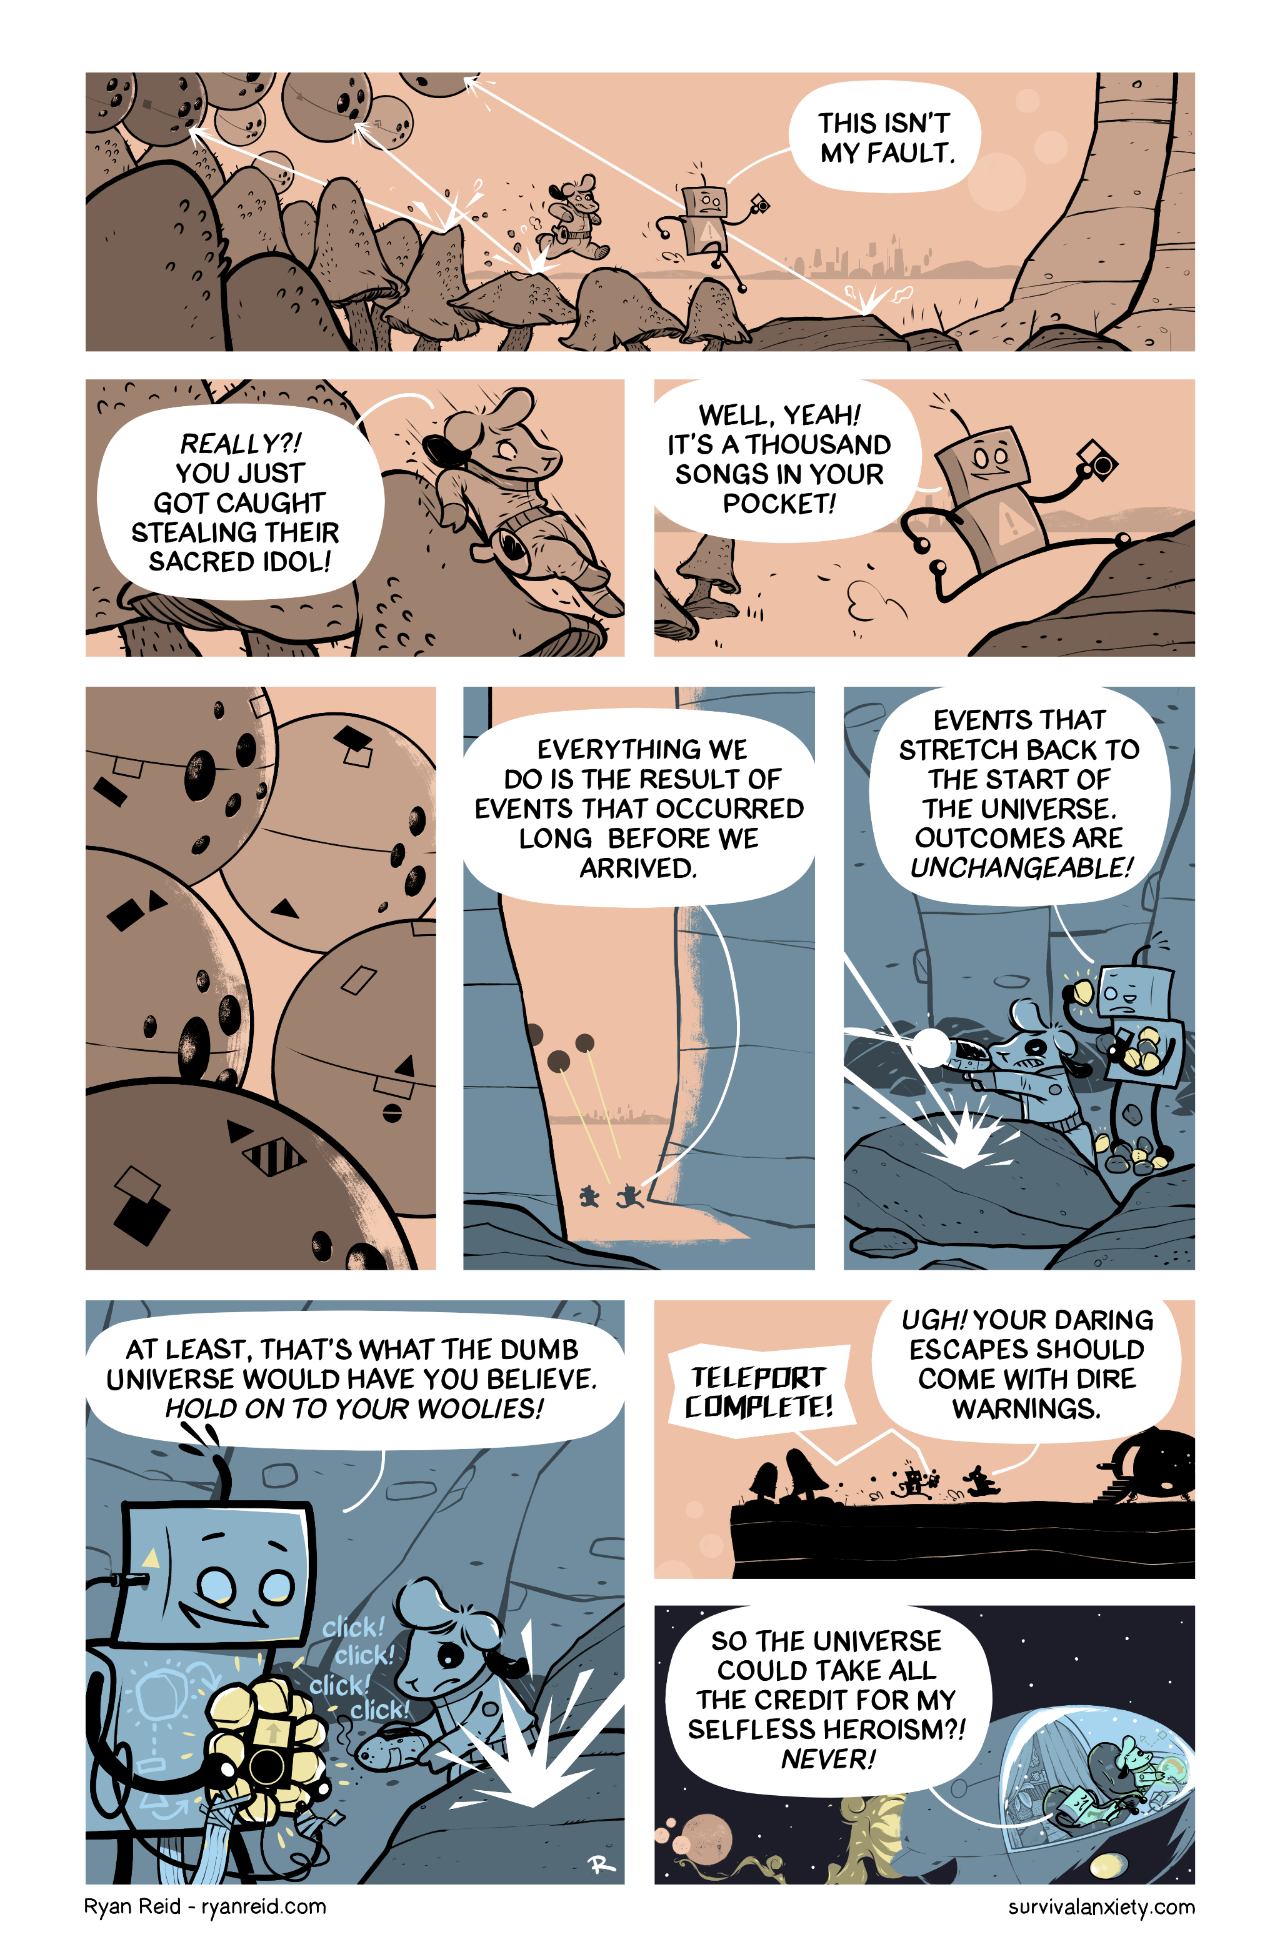 In this comic, Robot shares his unusual philosophy of the universe with Francis the Sheep, while they run for their lives.